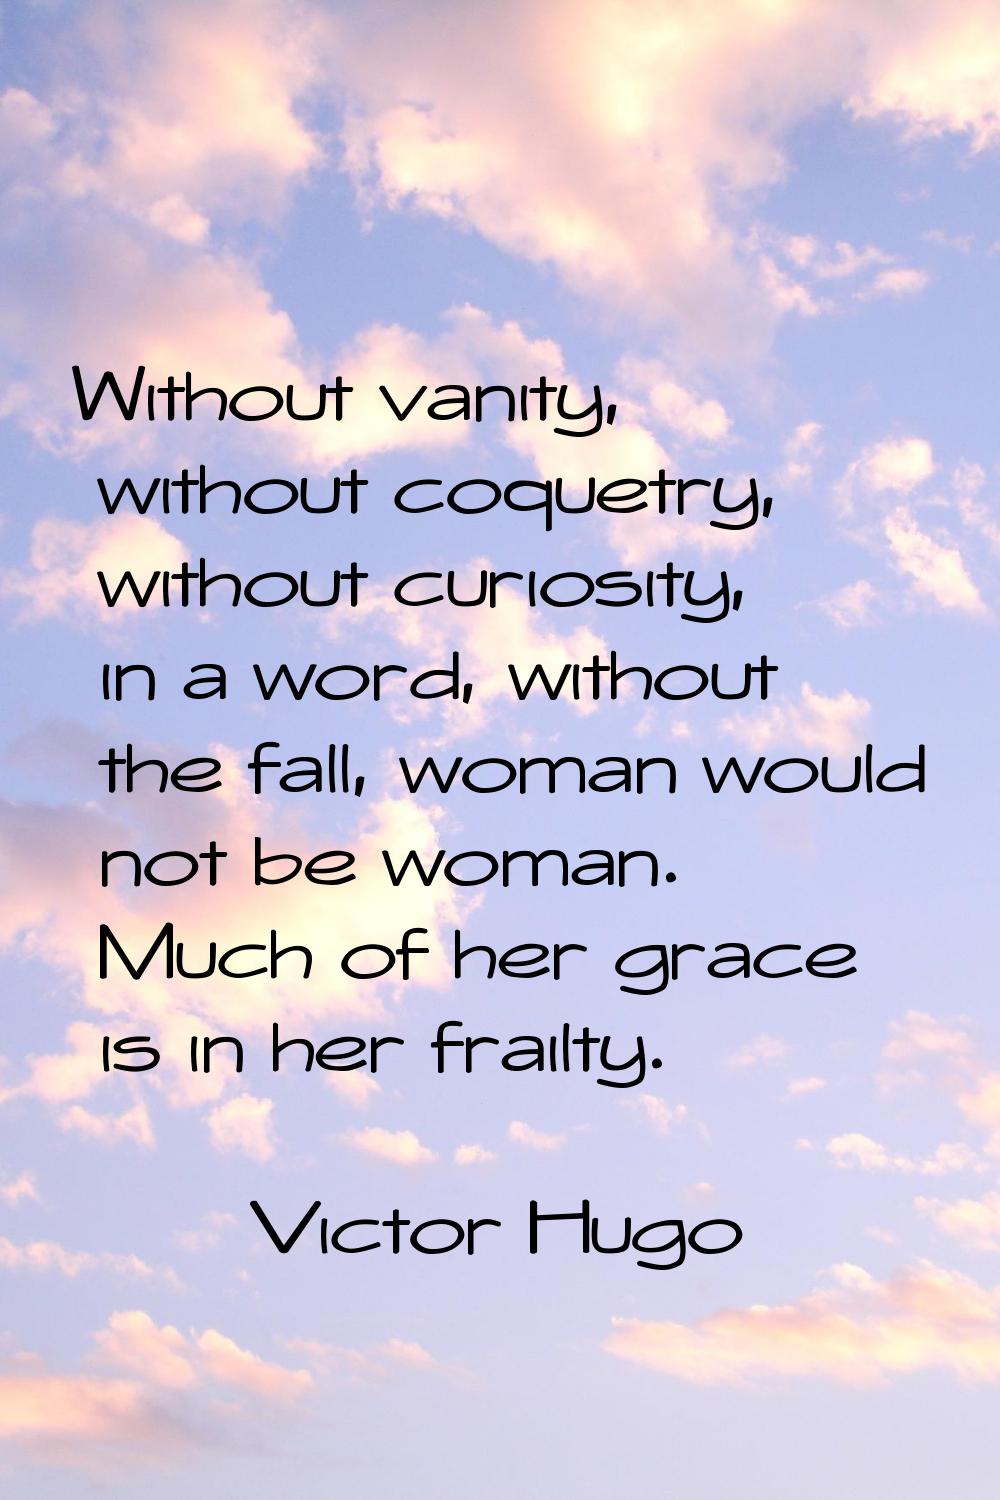 Without vanity, without coquetry, without curiosity, in a word, without the fall, woman would not b